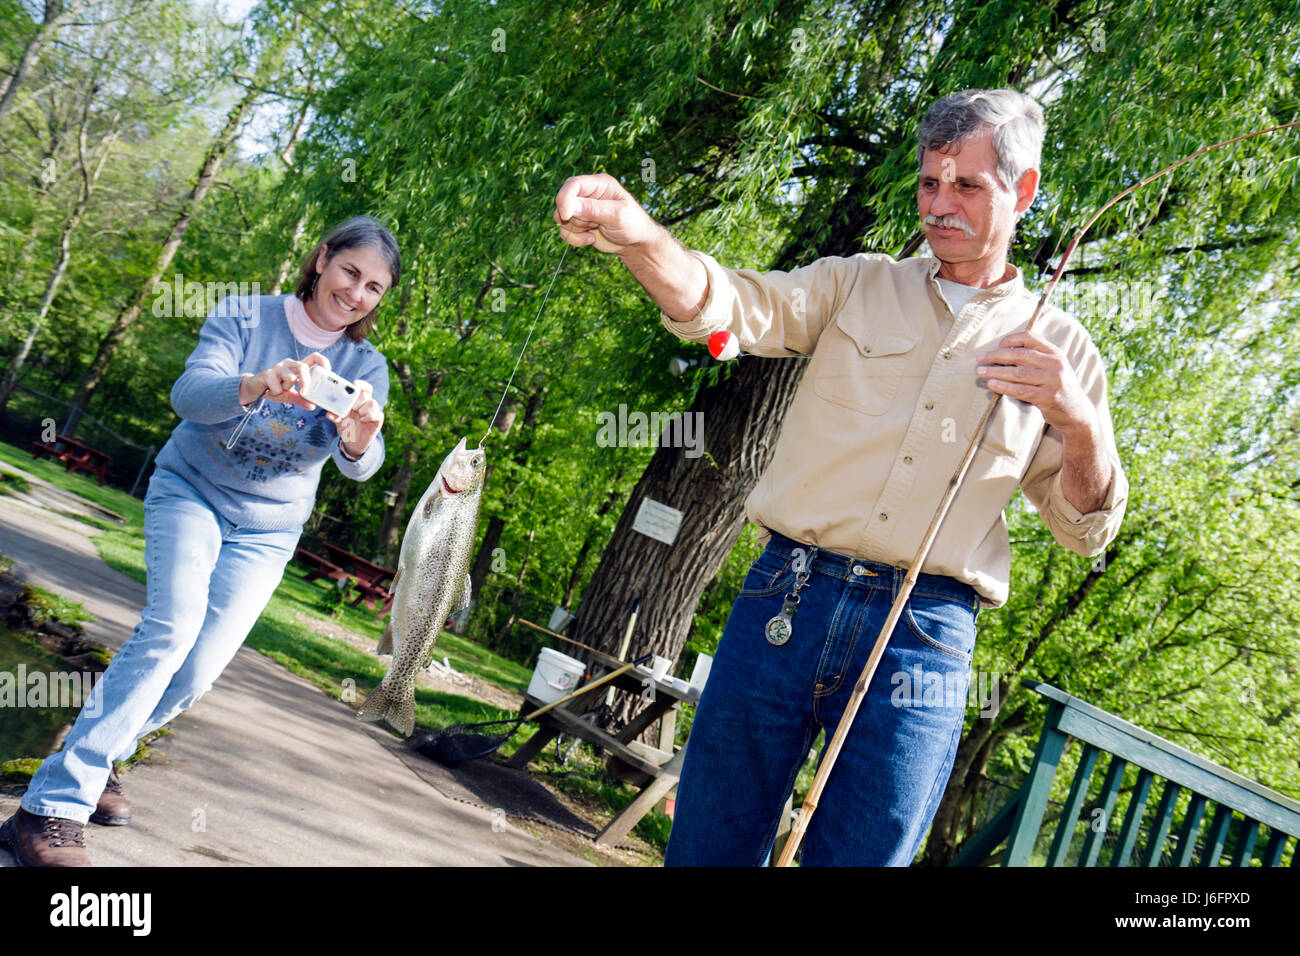 Sevierville Tennessee,Smoky Mountains,English Mountain Trout Farm & Grill,catch,eat,rainbow trout,man men male,woman female women,couple,catch,camera, Stock Photo